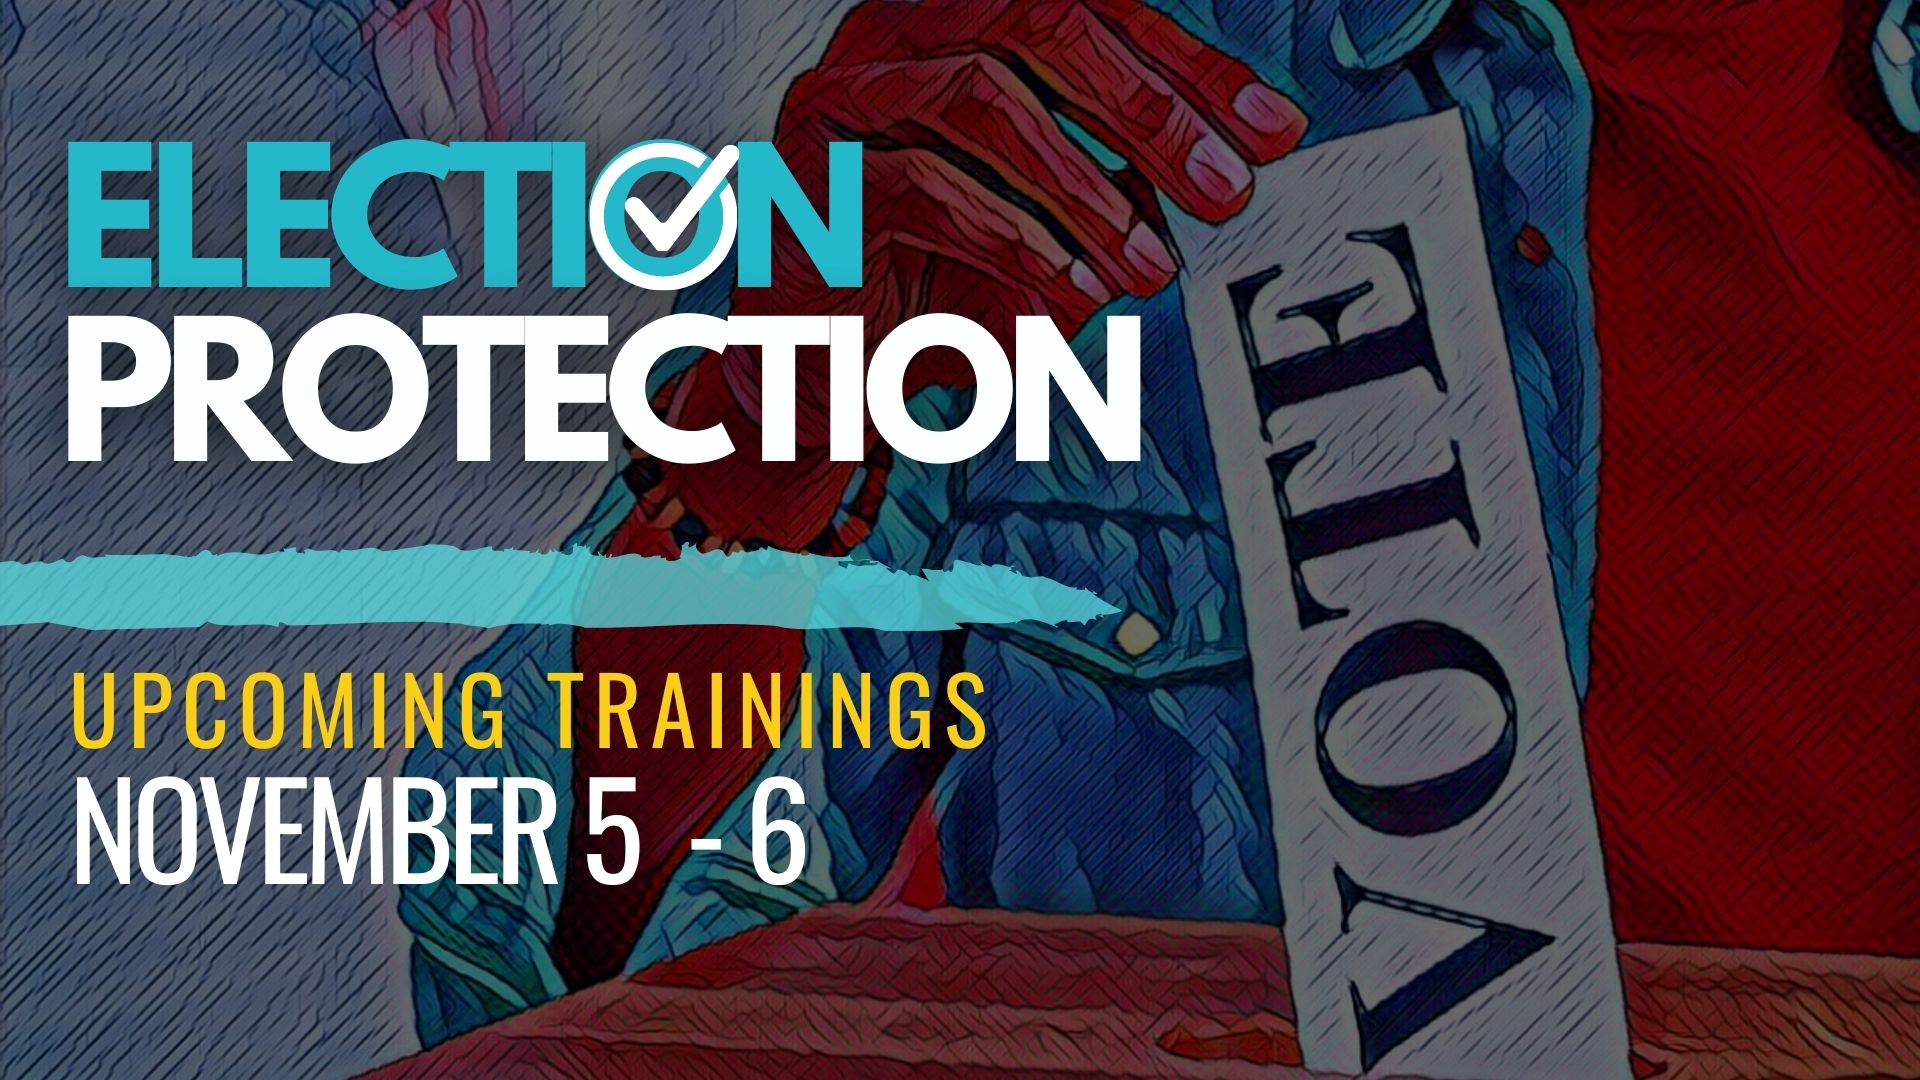 Election Protection Training